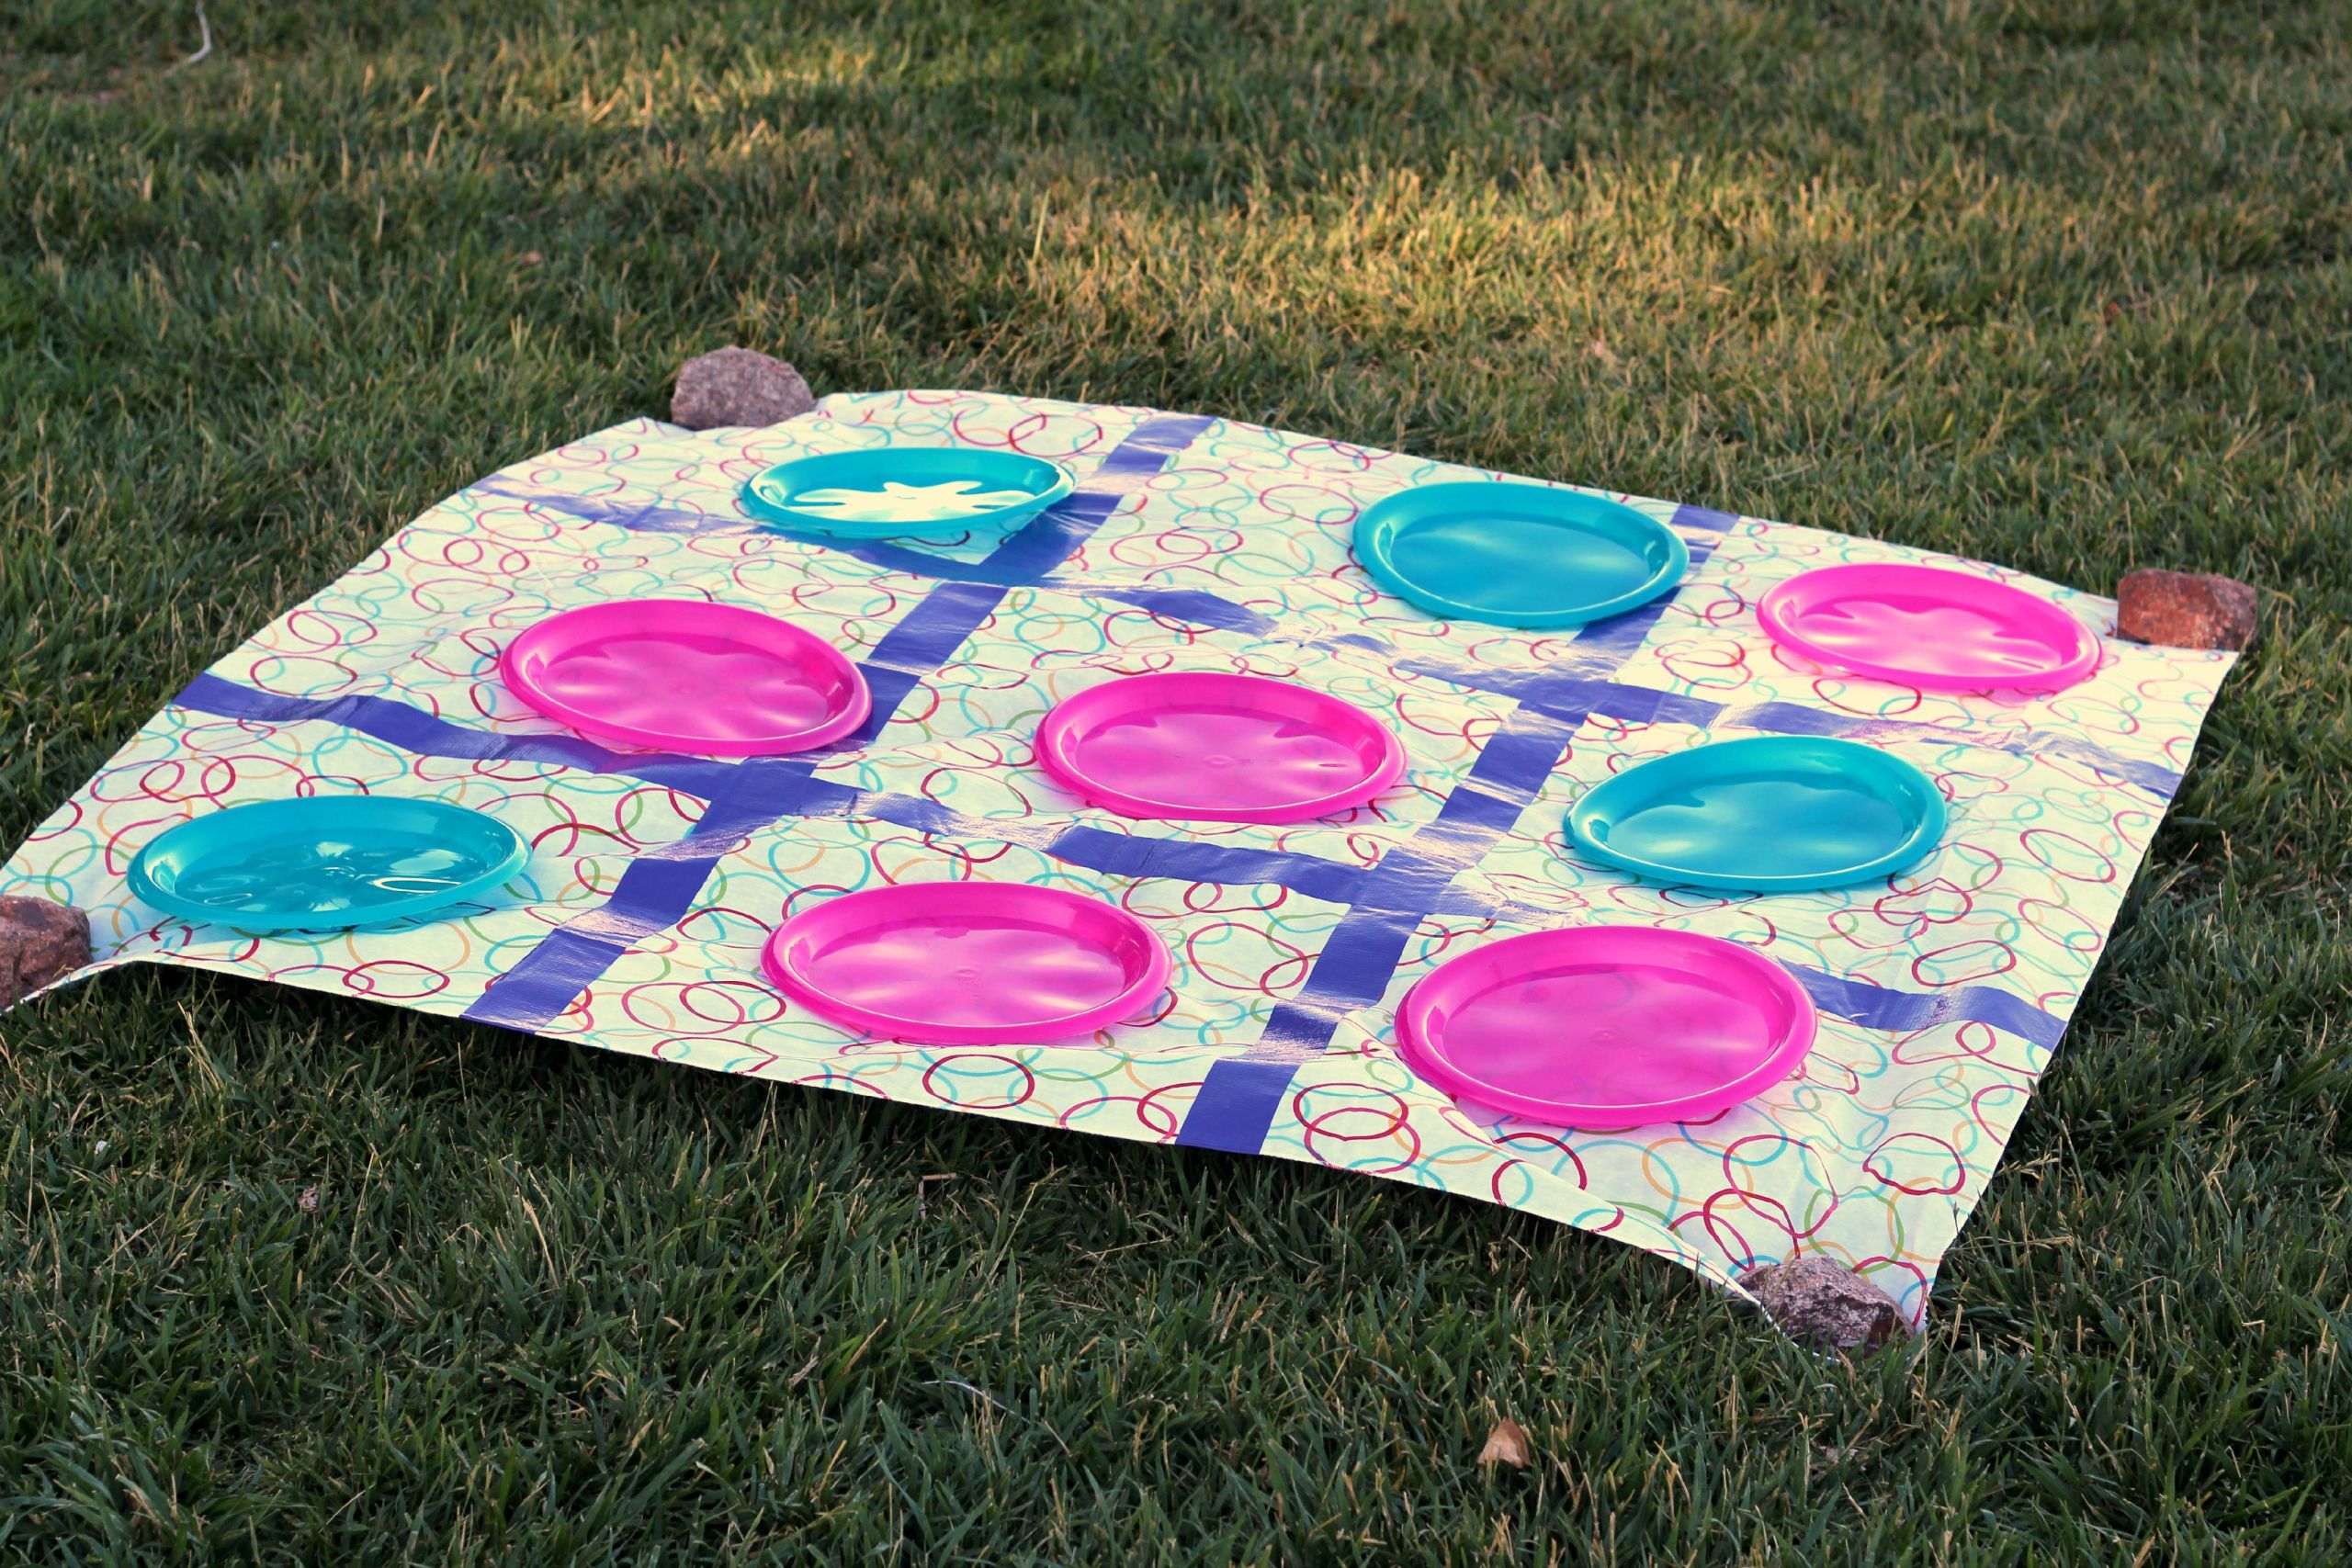 Fun Outdoor Games For Kids
 10 Outside Games Families Can Play To her TipTopTens